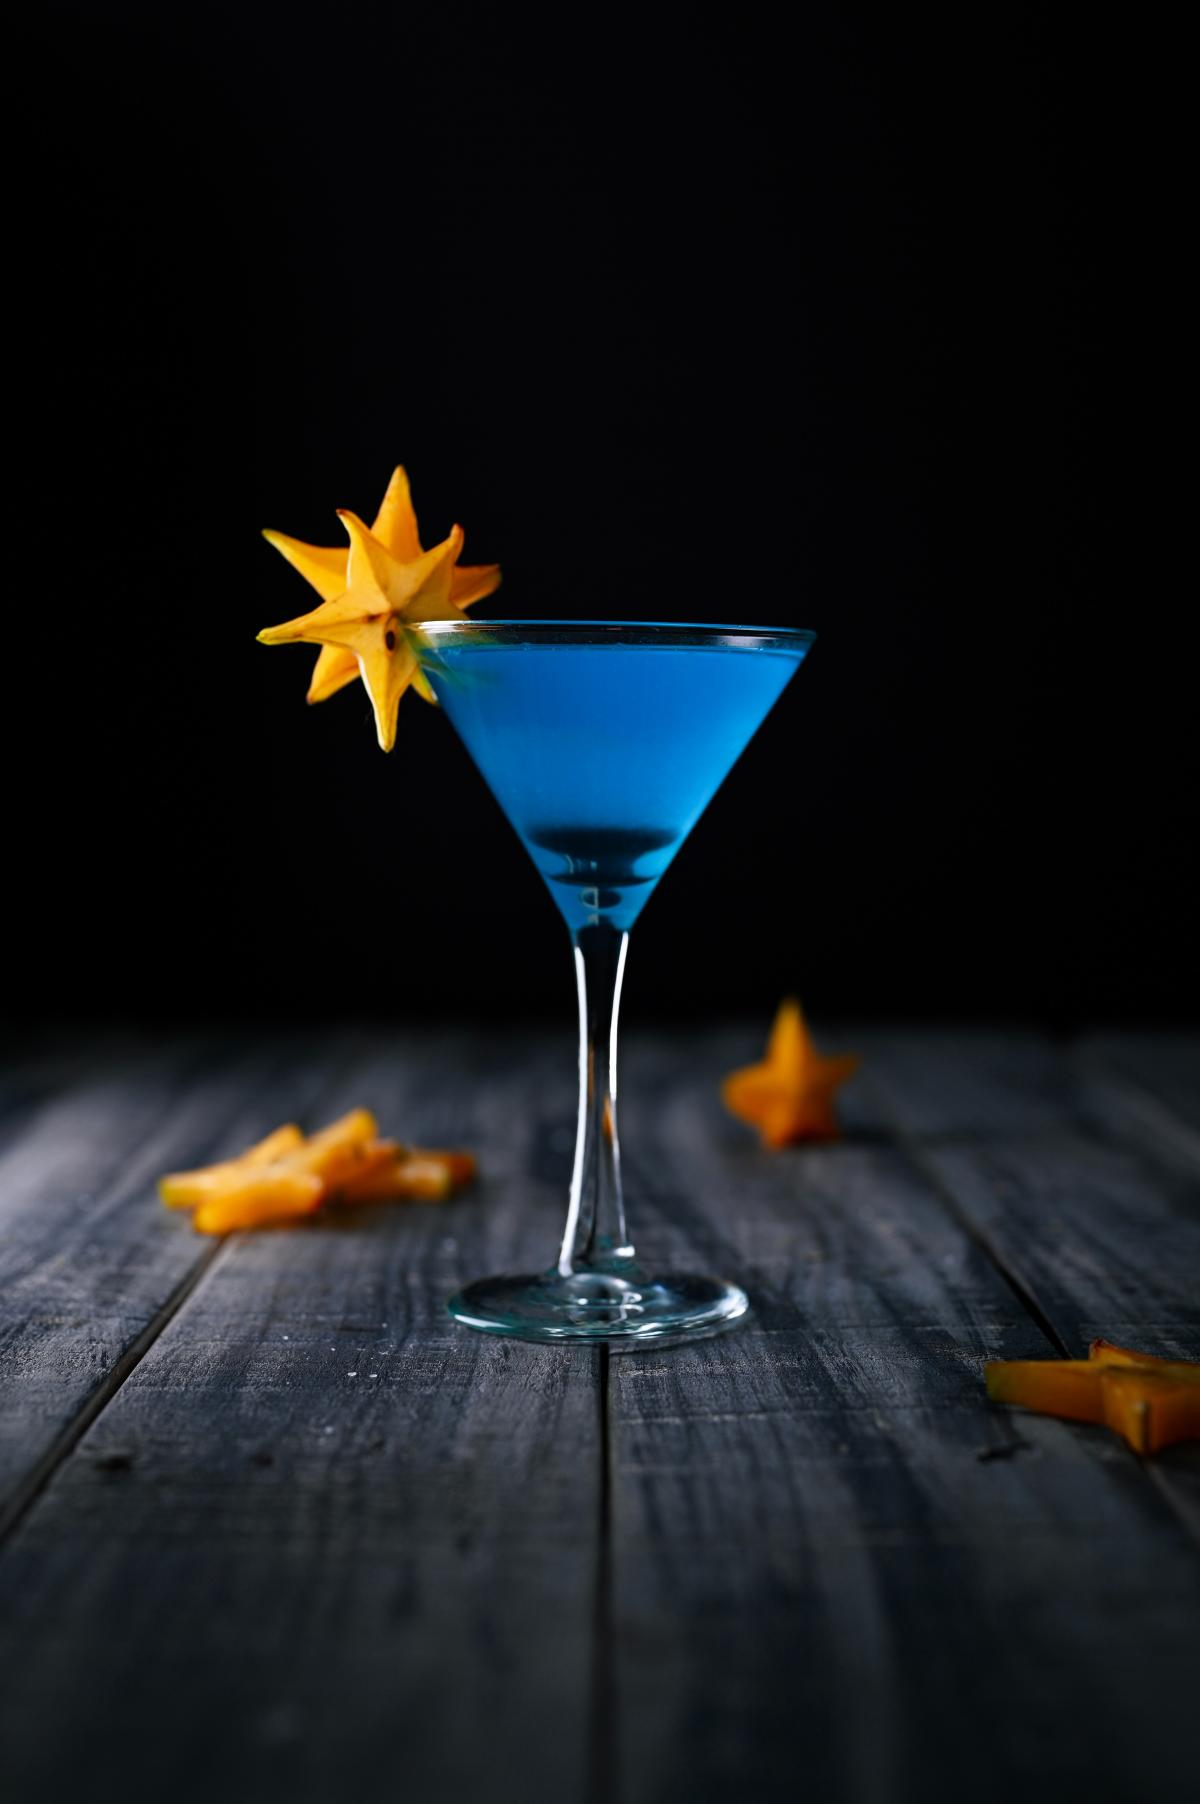 for LATE NIGHT COCKTAILS_Photo by Ram HO on Unsplash